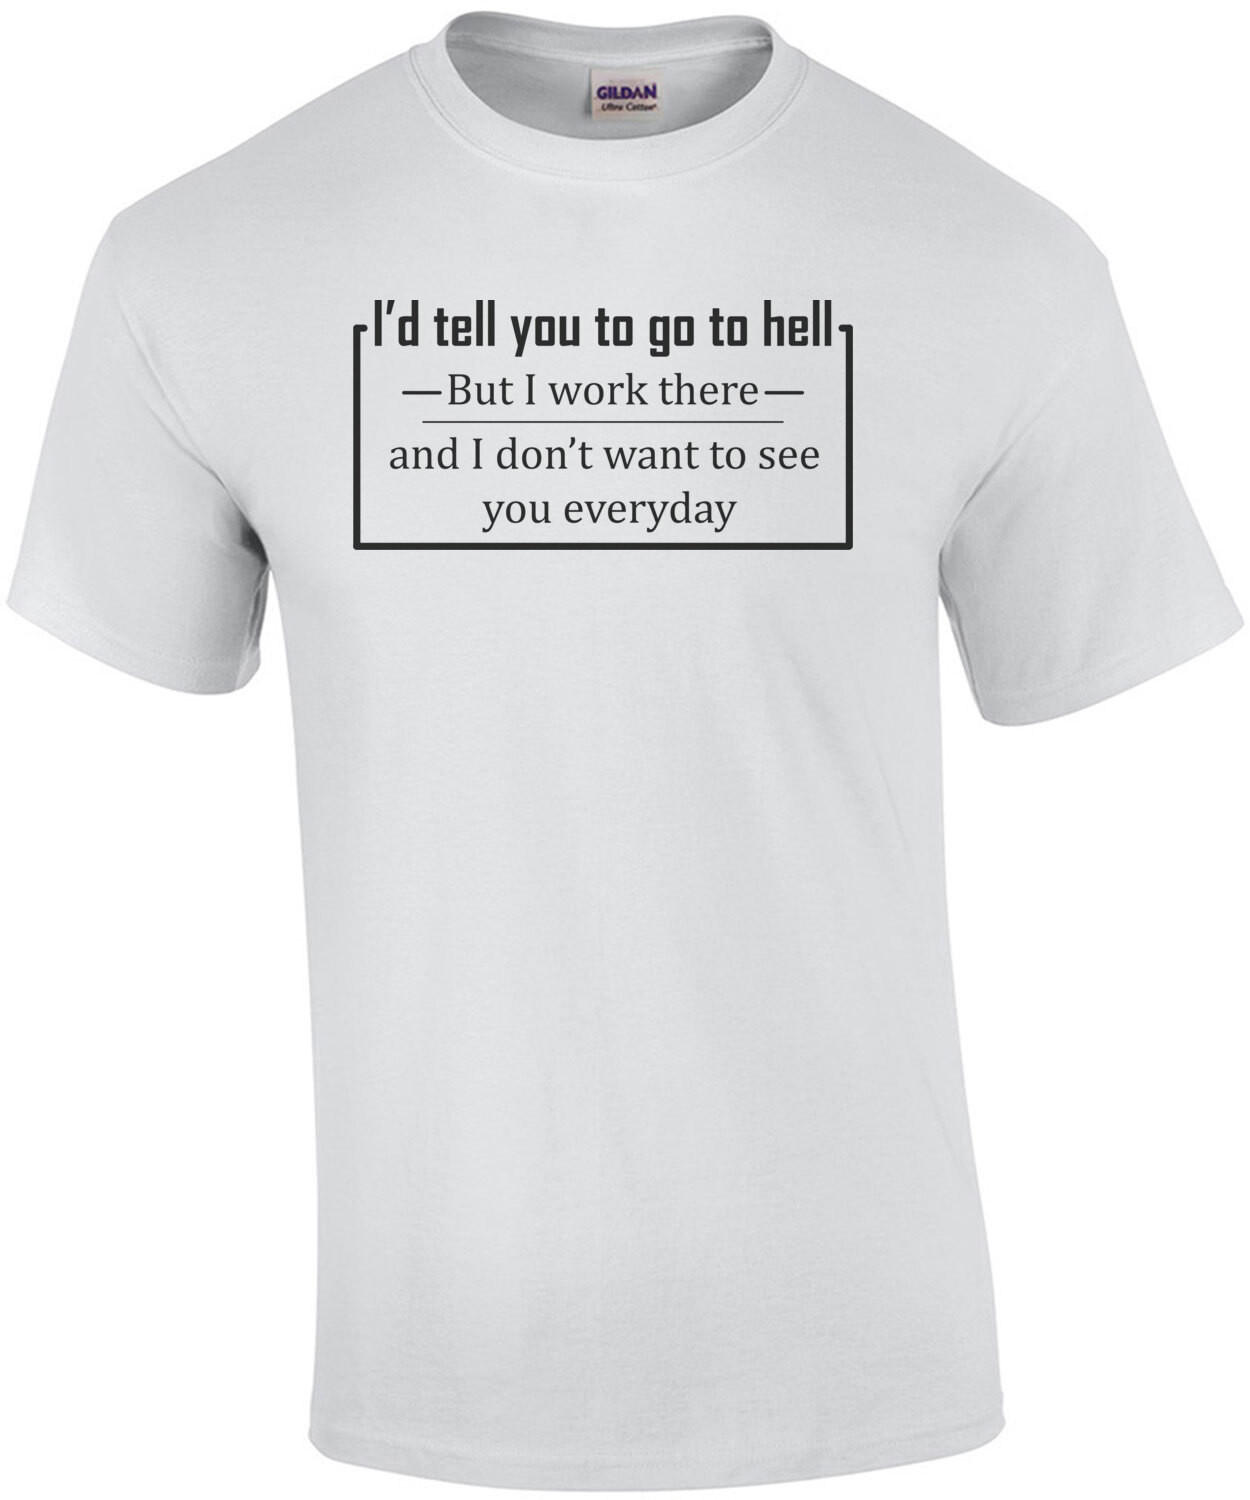 I'd tell you to go to hell, but I work there and don't want to see you every day. Shirt